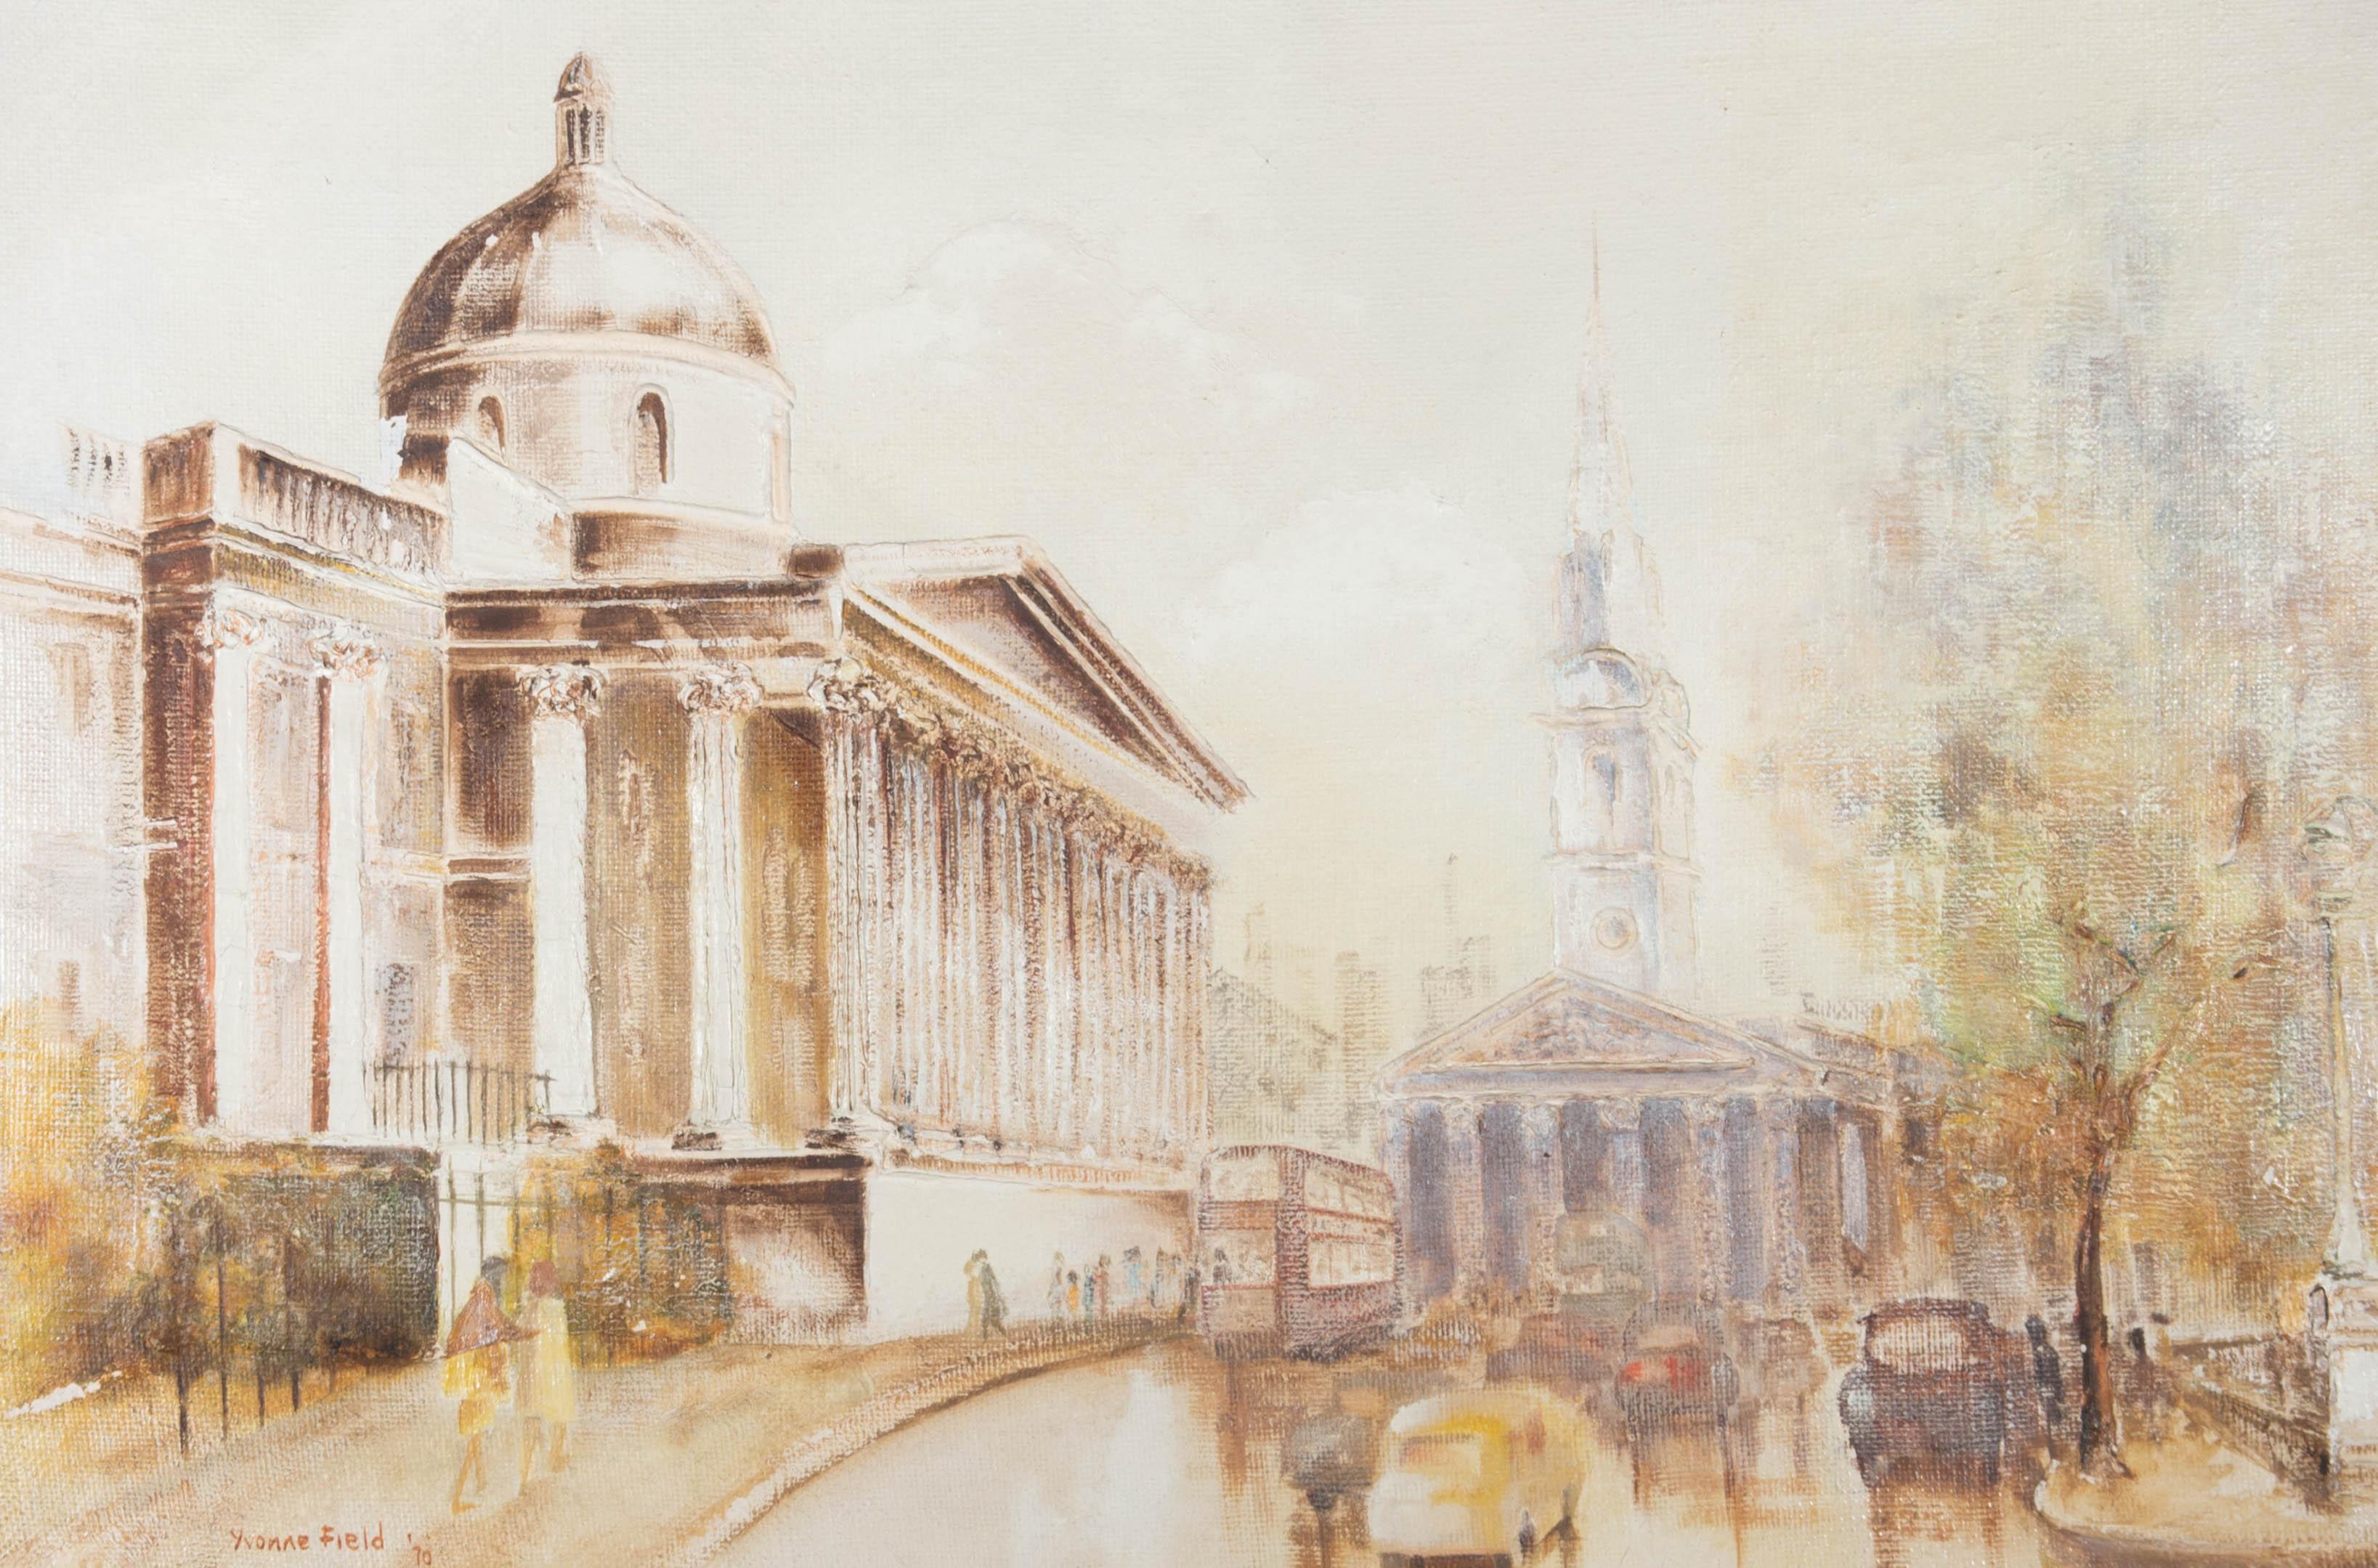 A stylised mixed media piece showing a view of various London landmarks, including the London Exchange building. The artist has used a mix of relief and impasto media with the oil to create depth and architectural form in the buildings. The artist